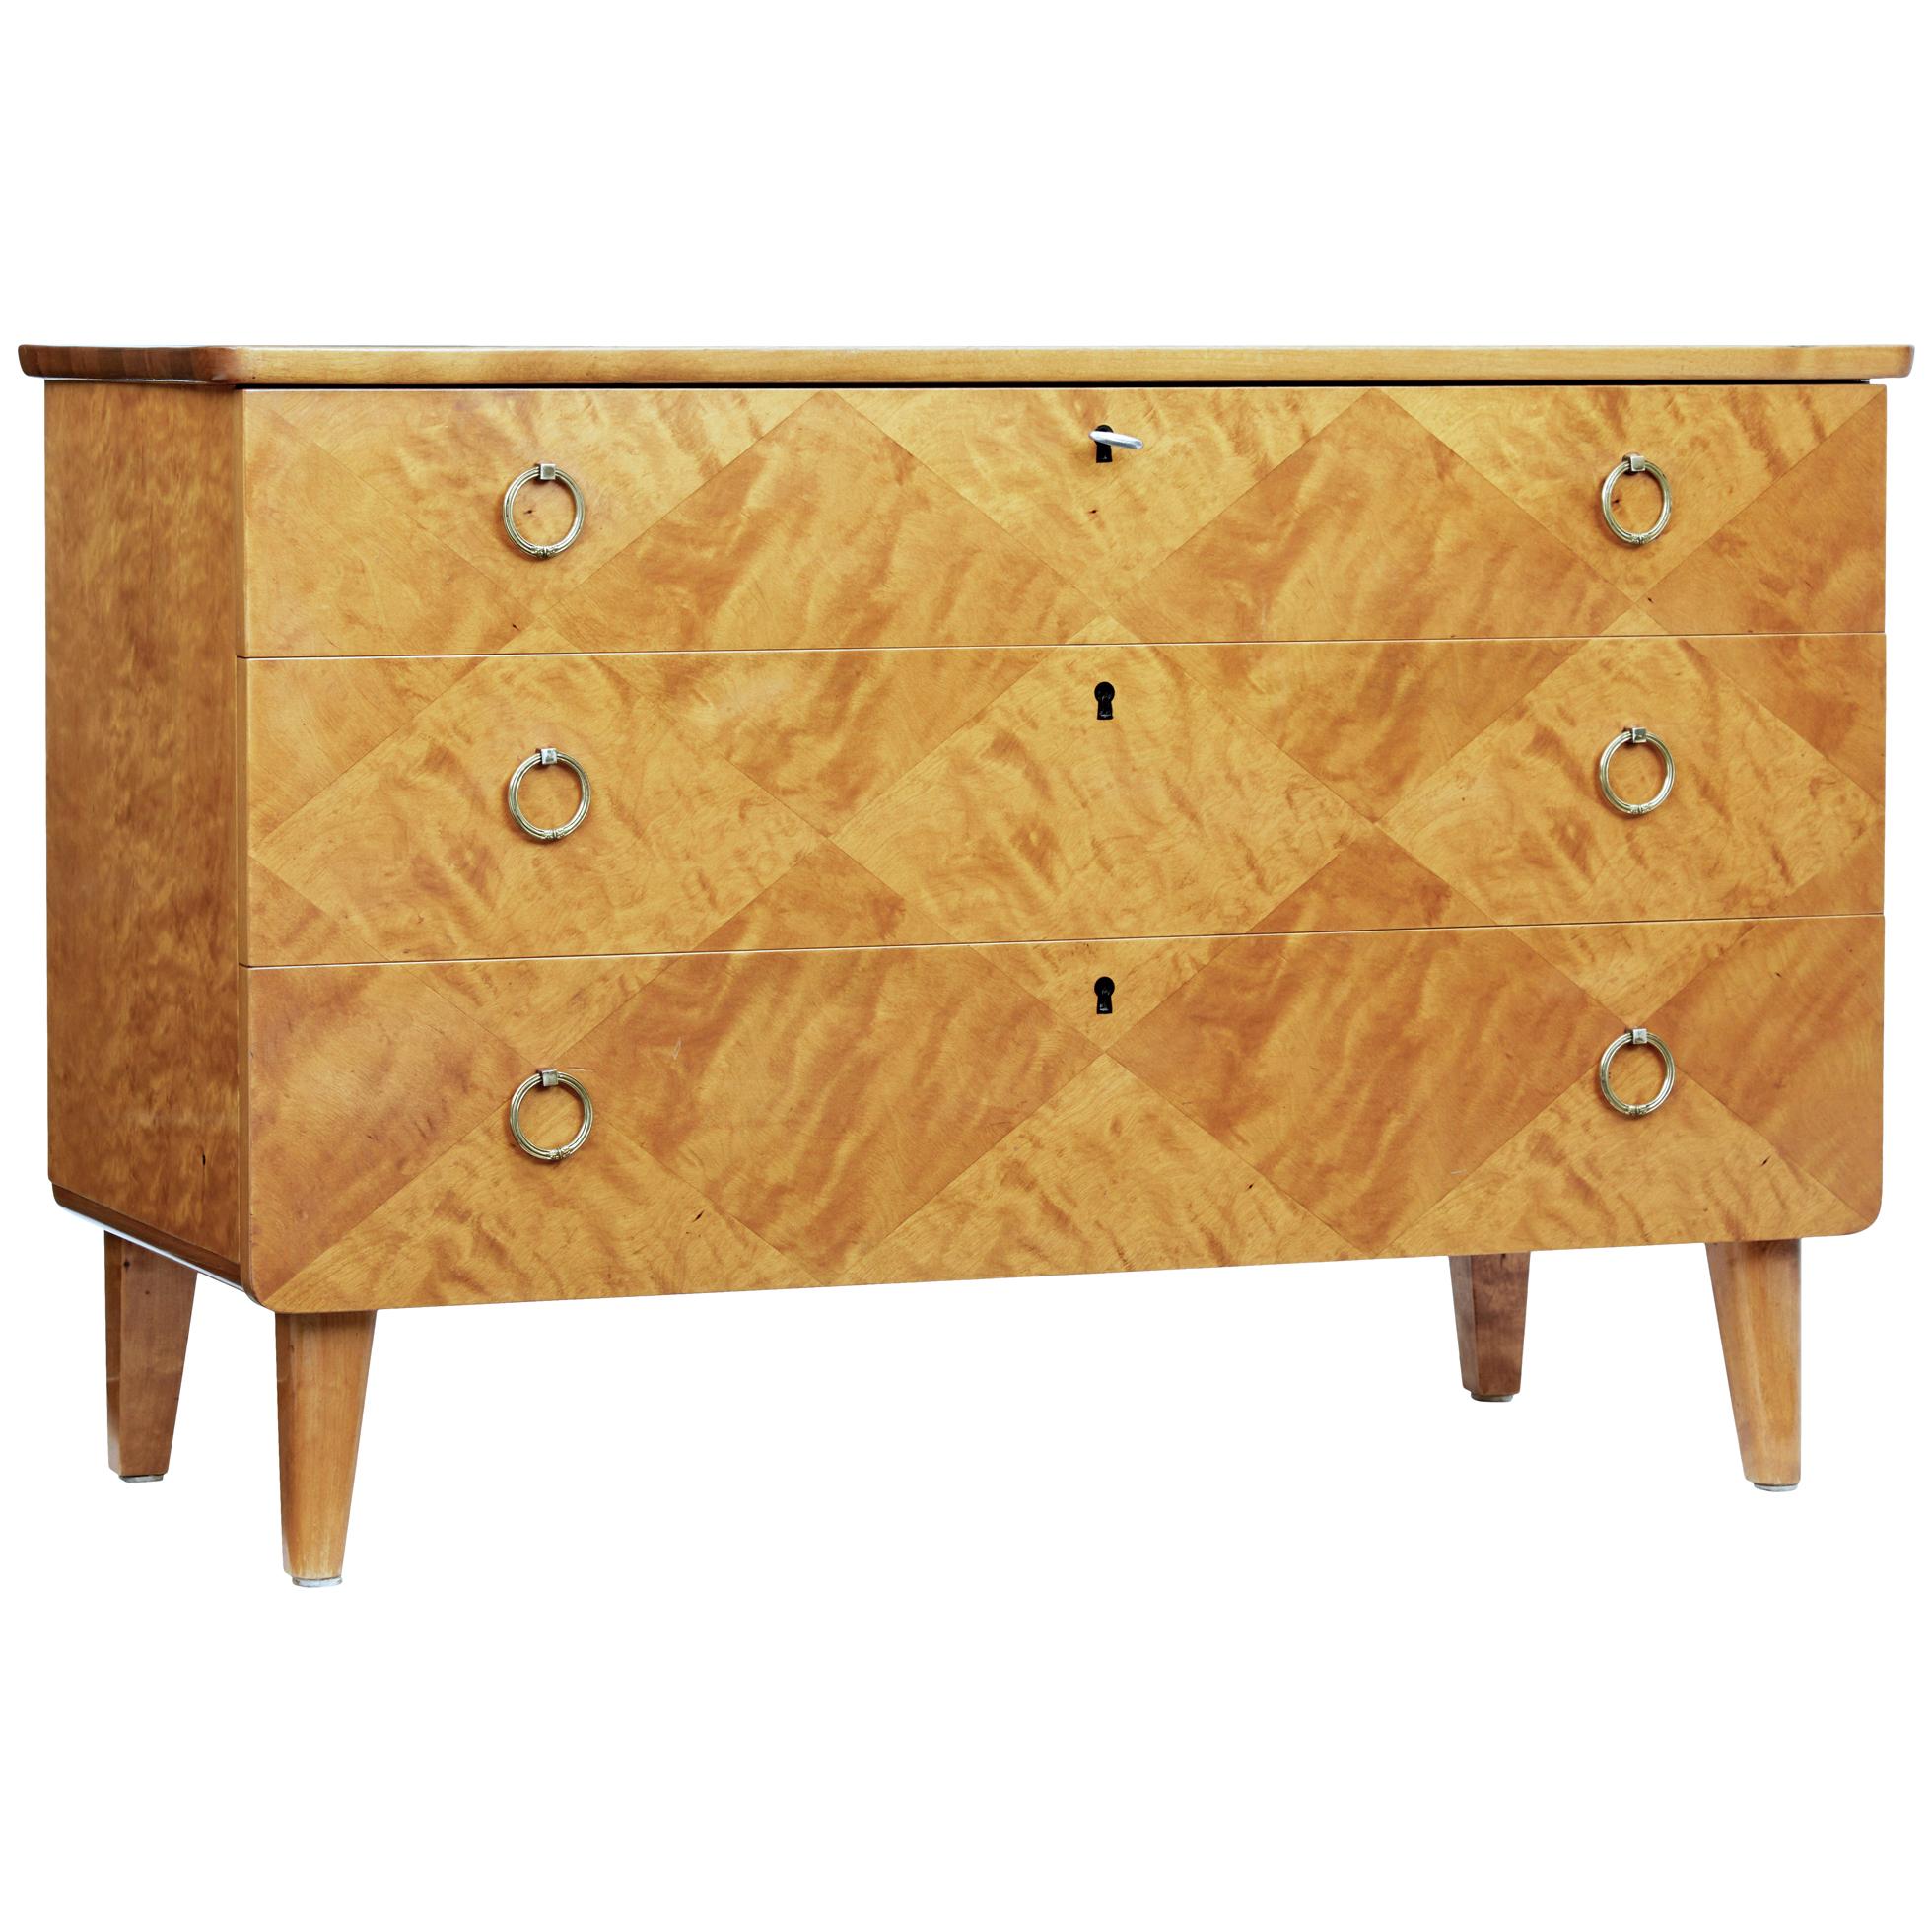 Mid-20th Century Scandinavian Patterned Birch Chest of Drawers